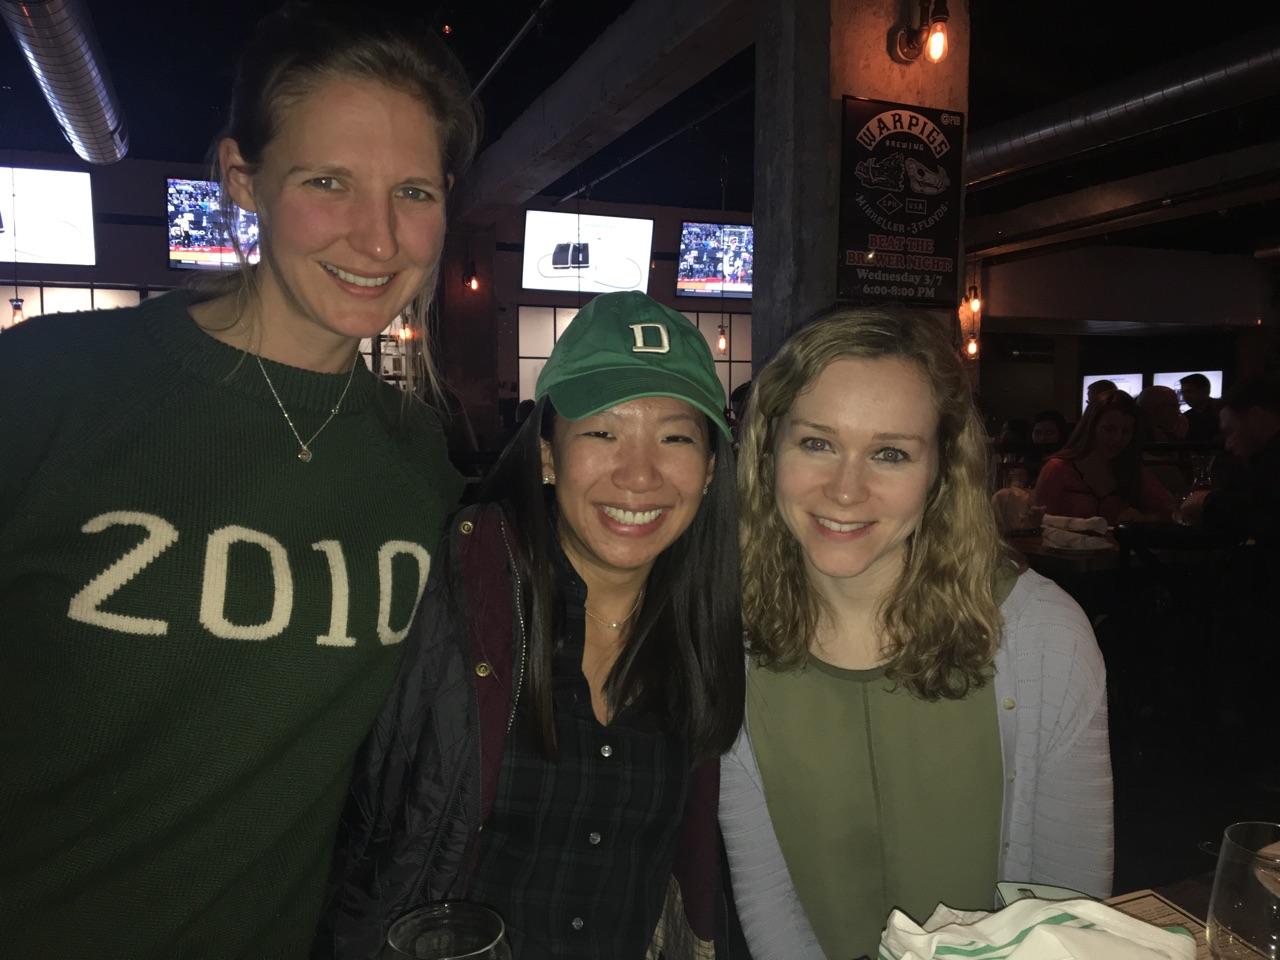 In Providence, alumni gathered for shuffleboard, appetizers, and drinks at the Providence G Pub